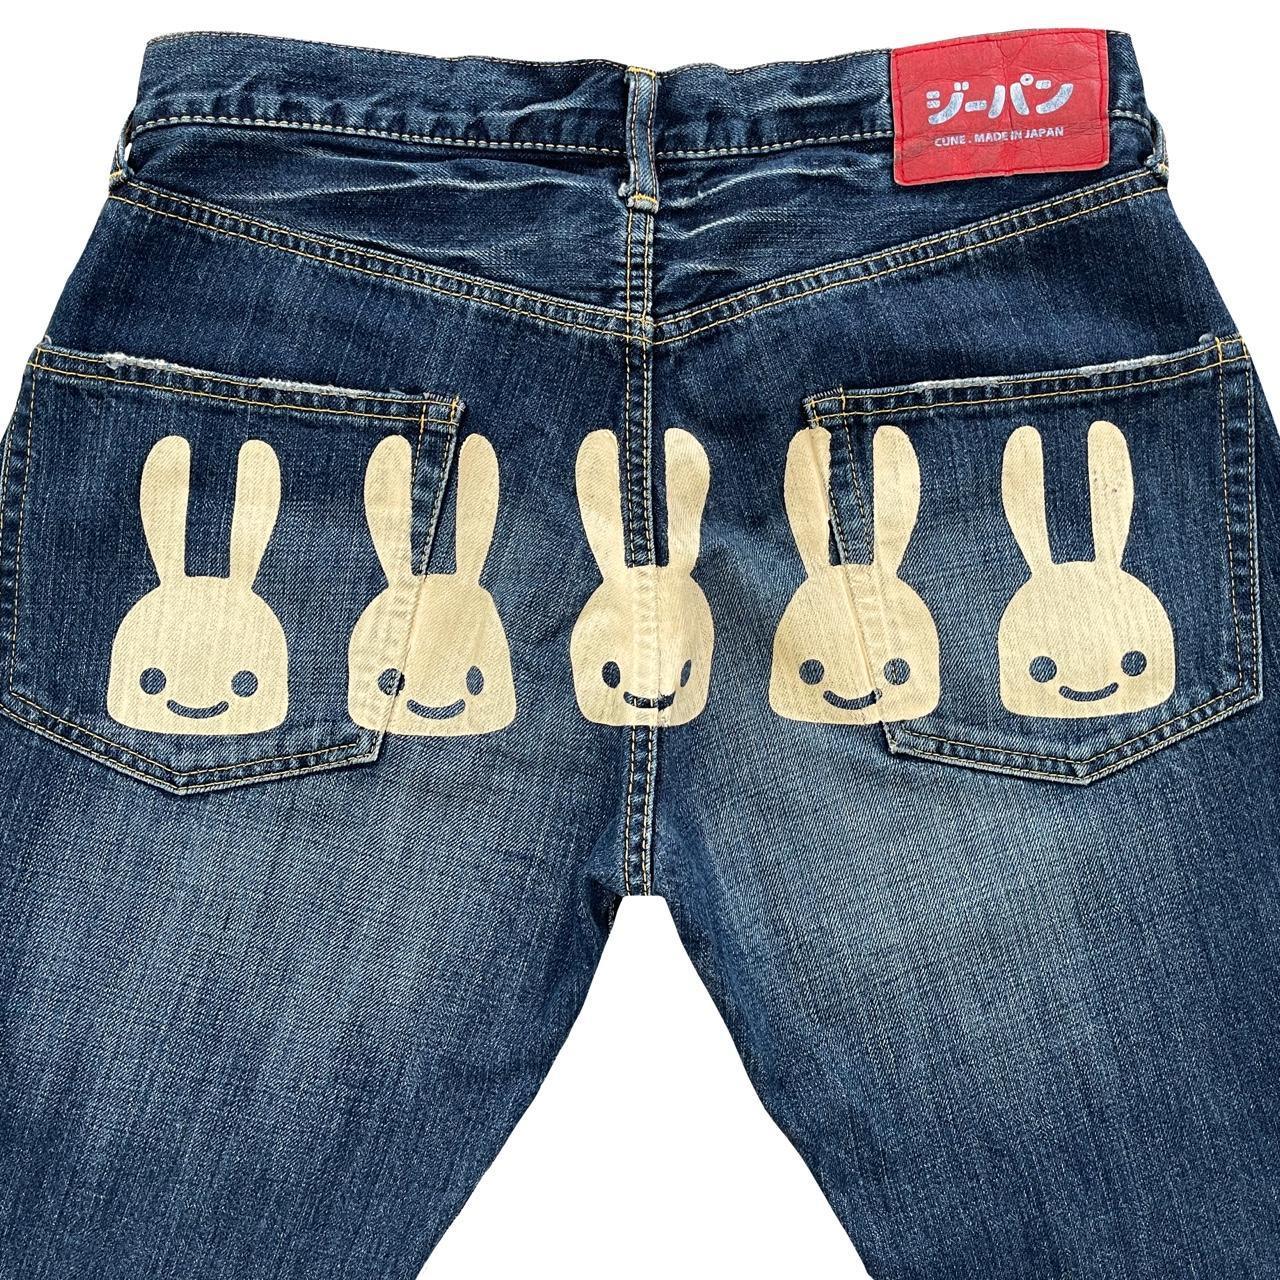 Cune Bunny Jeans - Known Source